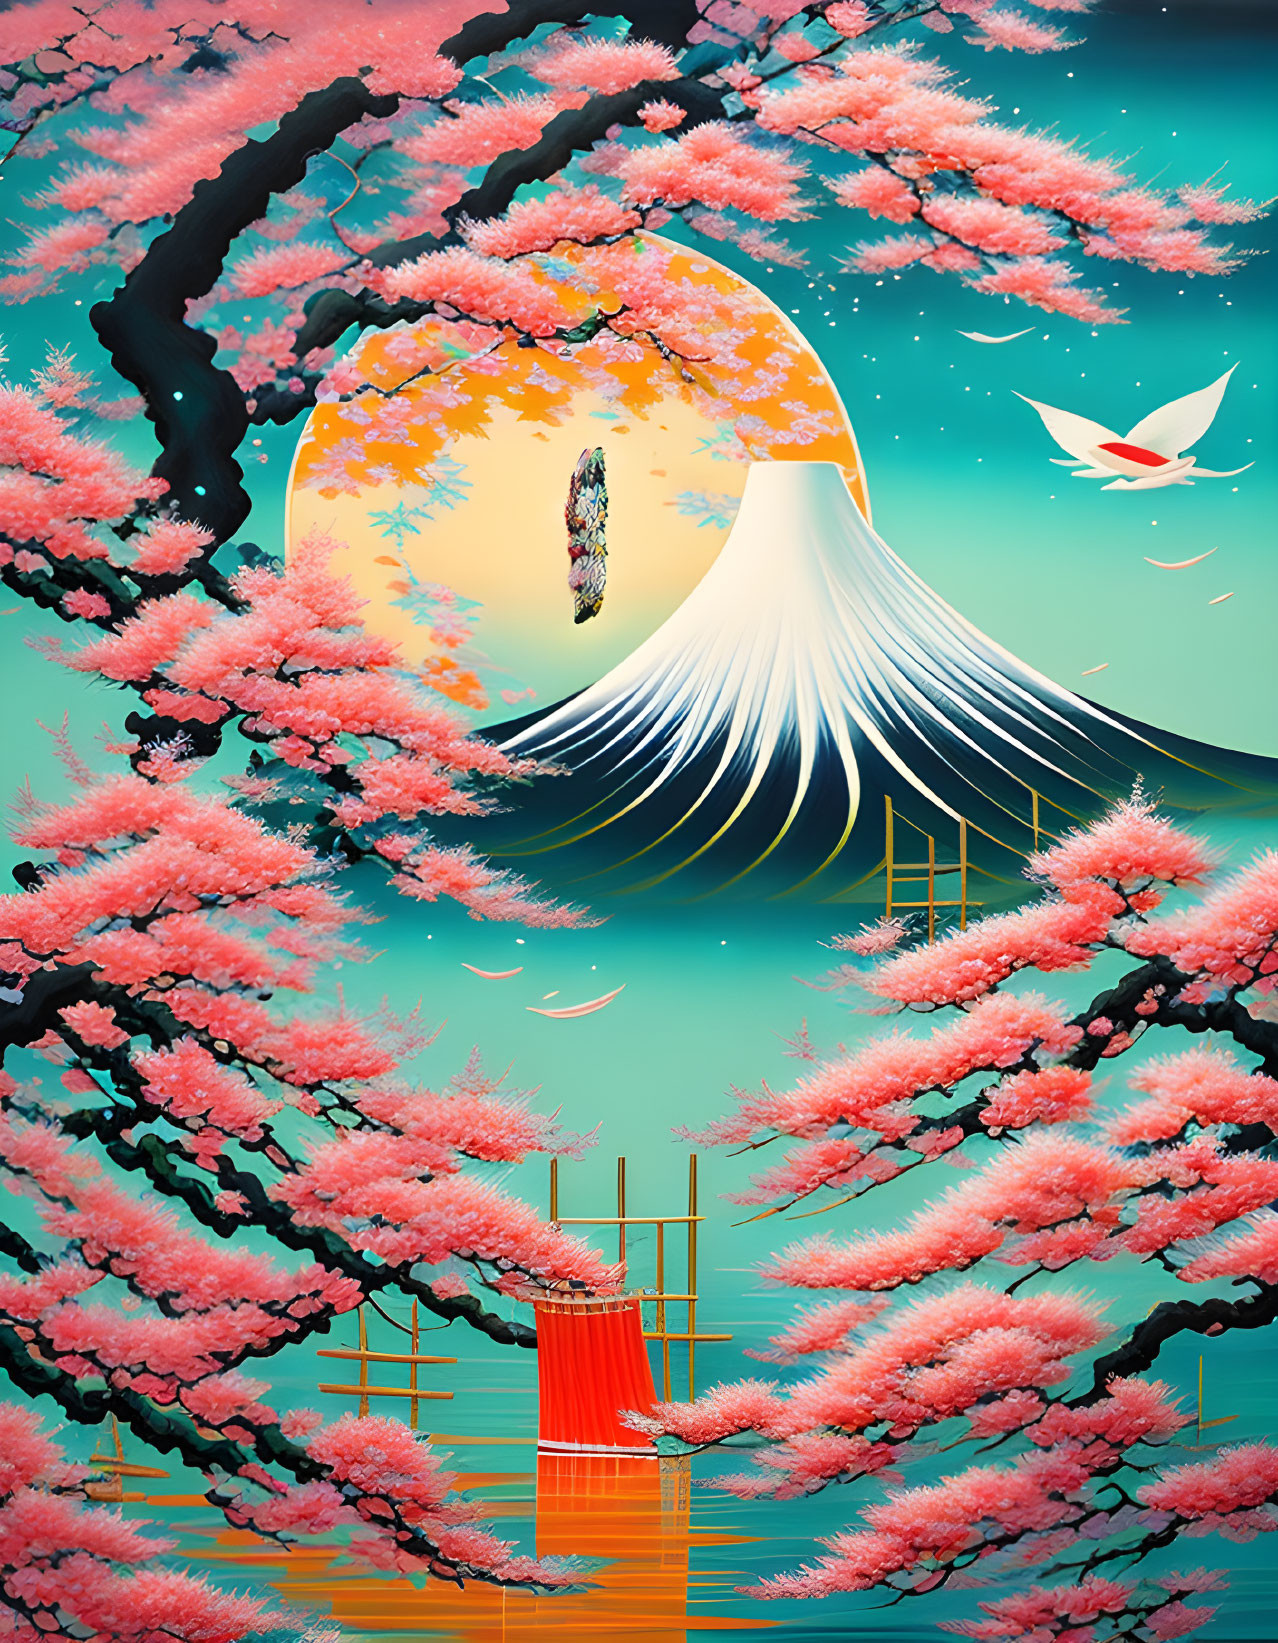 Stylized Mount Fuji with cherry blossoms, torii gate, cranes at sunrise